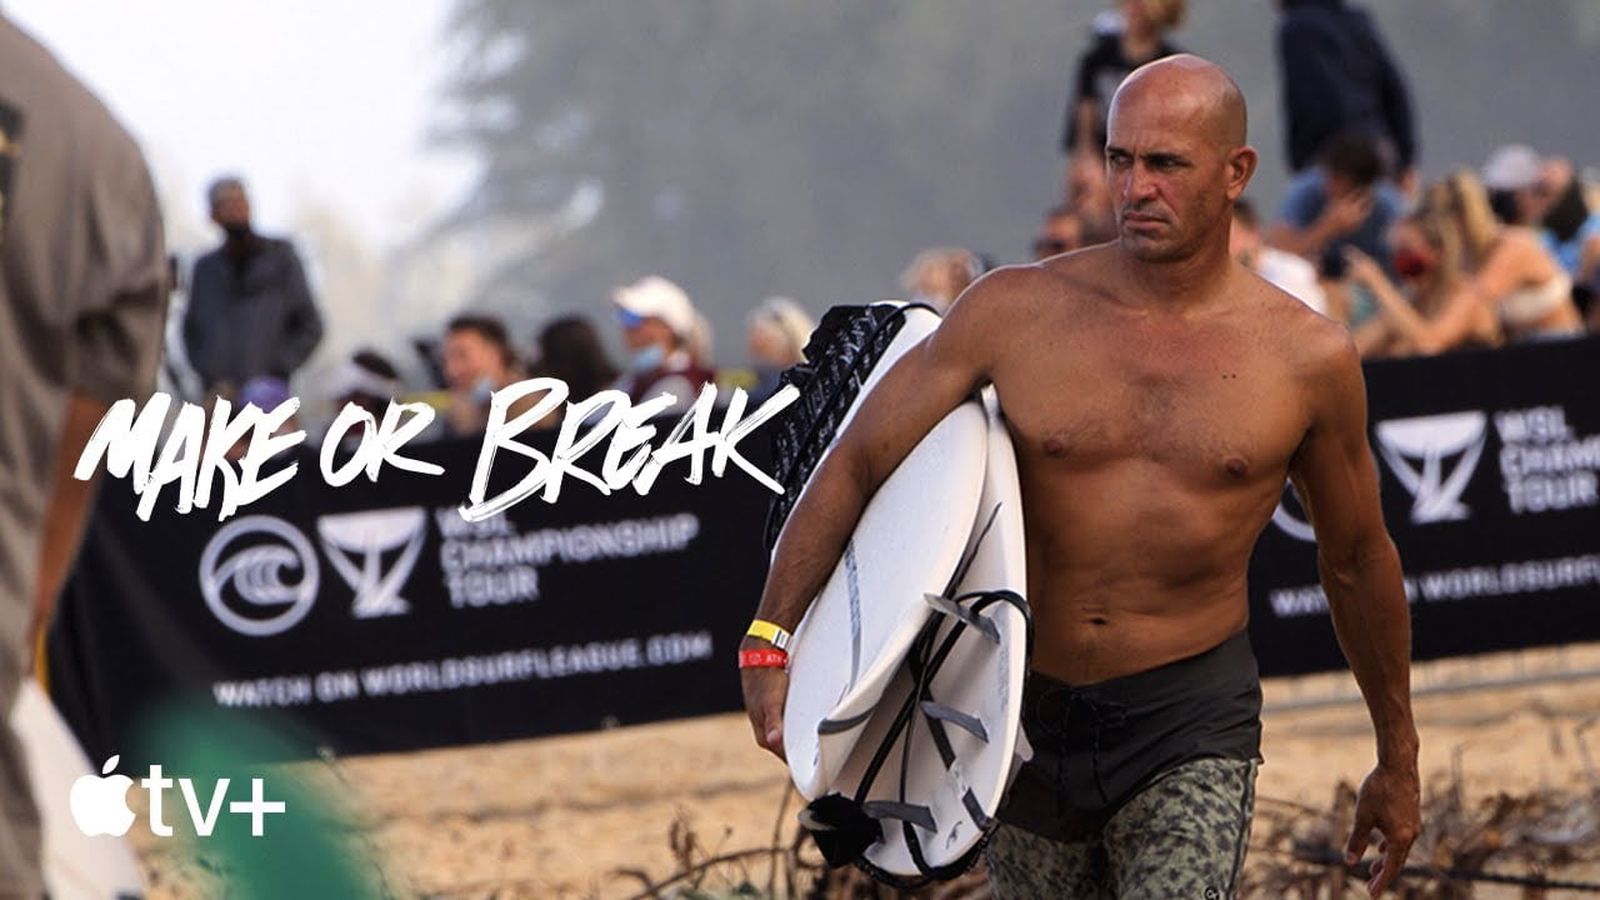 Surf Documentary ‘Make or Break’ Coming to Apple TV+ on April 29